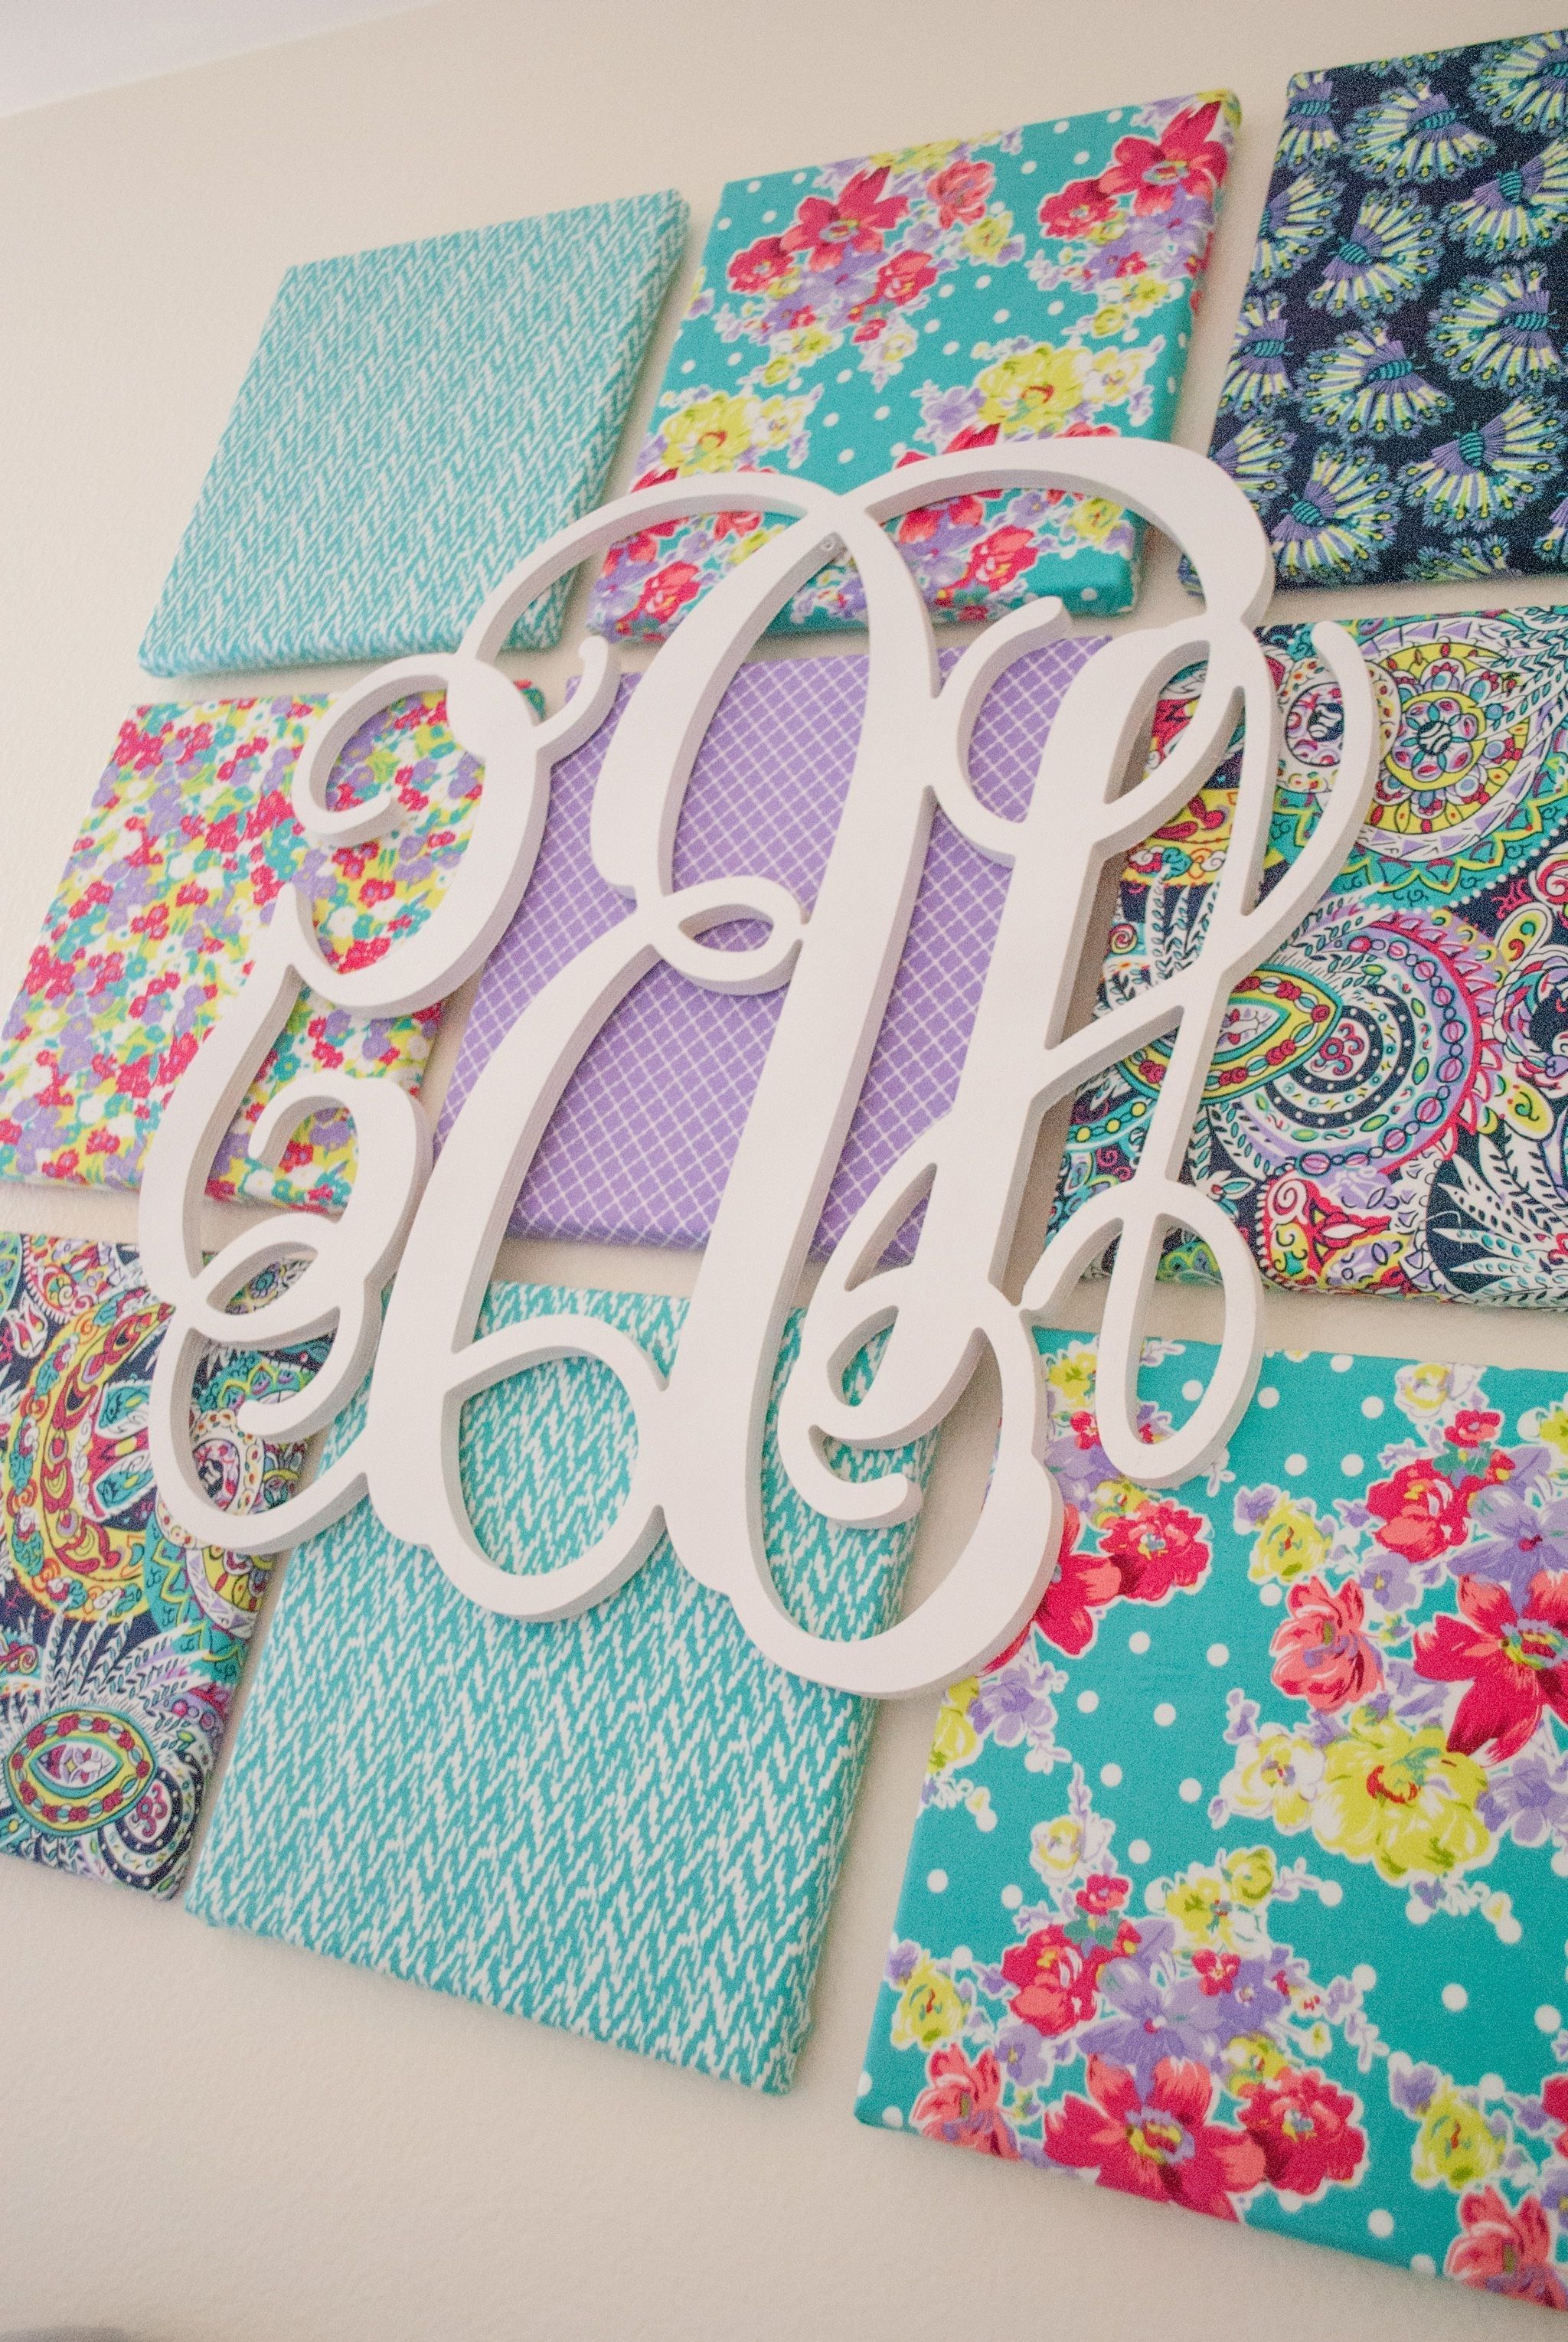 Monogram Wall, Kids Rooms And Monograms (View 10 of 15)